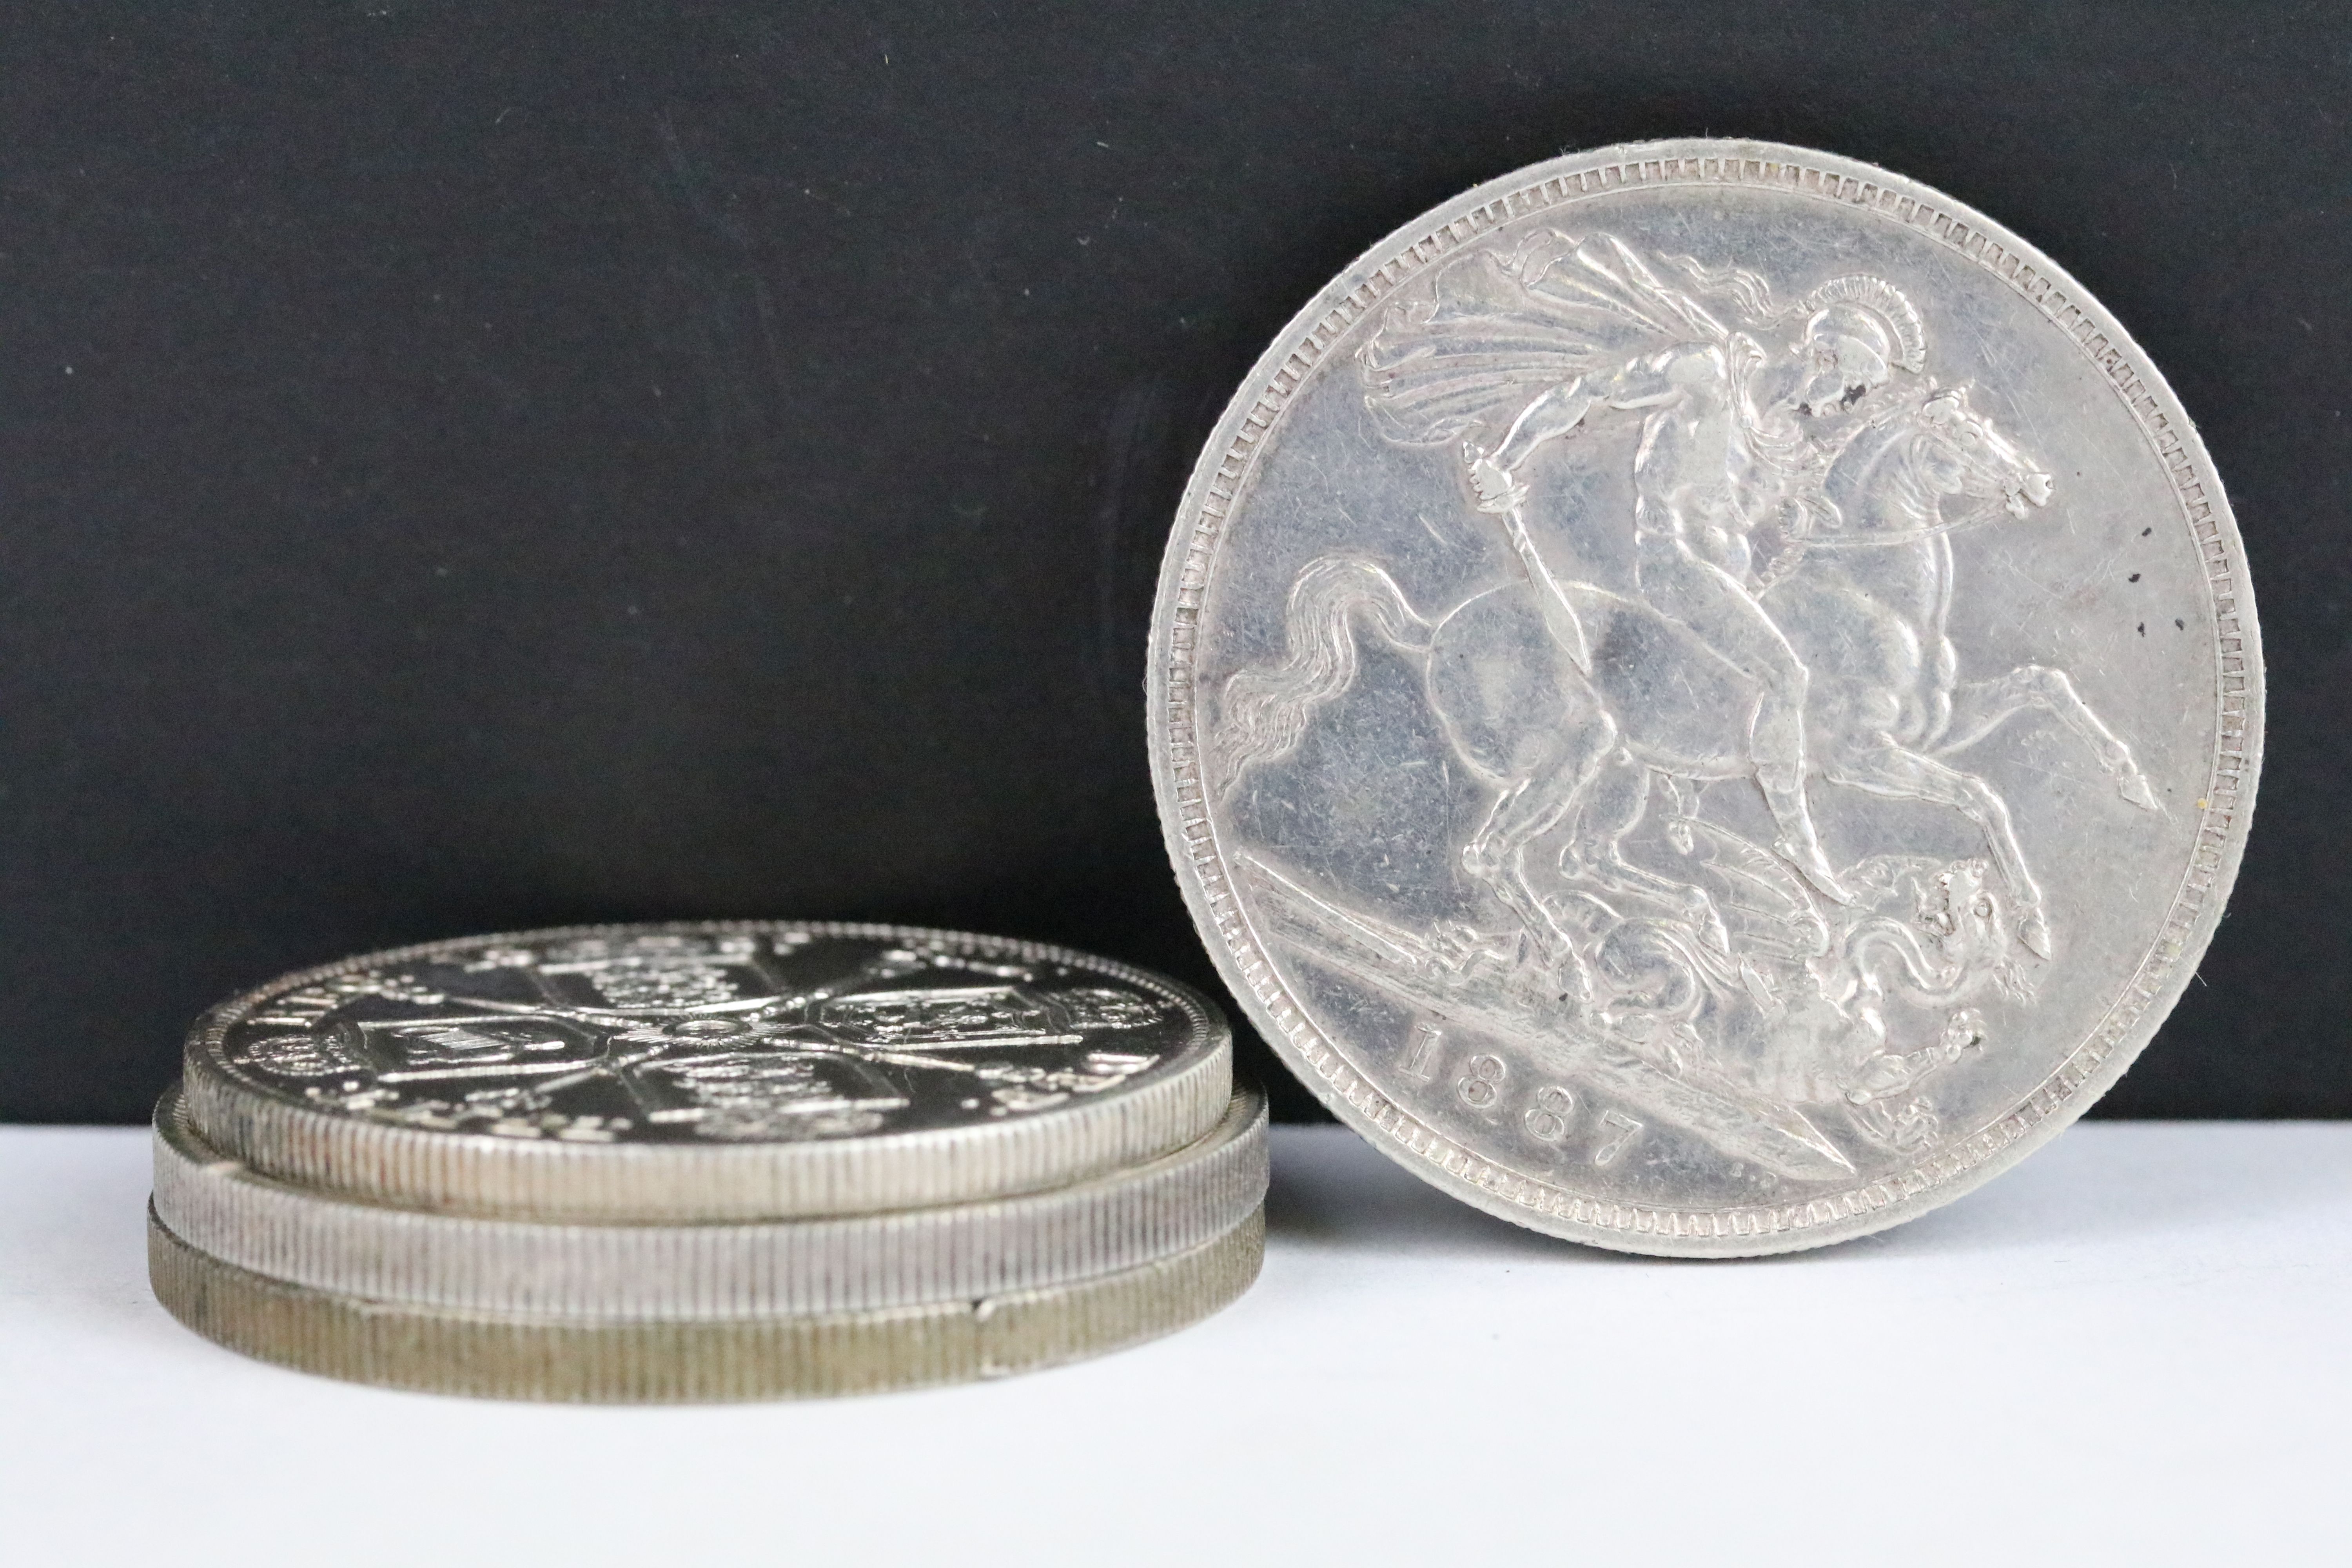 A collection of three British Queen Victoria silver Crown coins to include 1890, 1887 and 1887